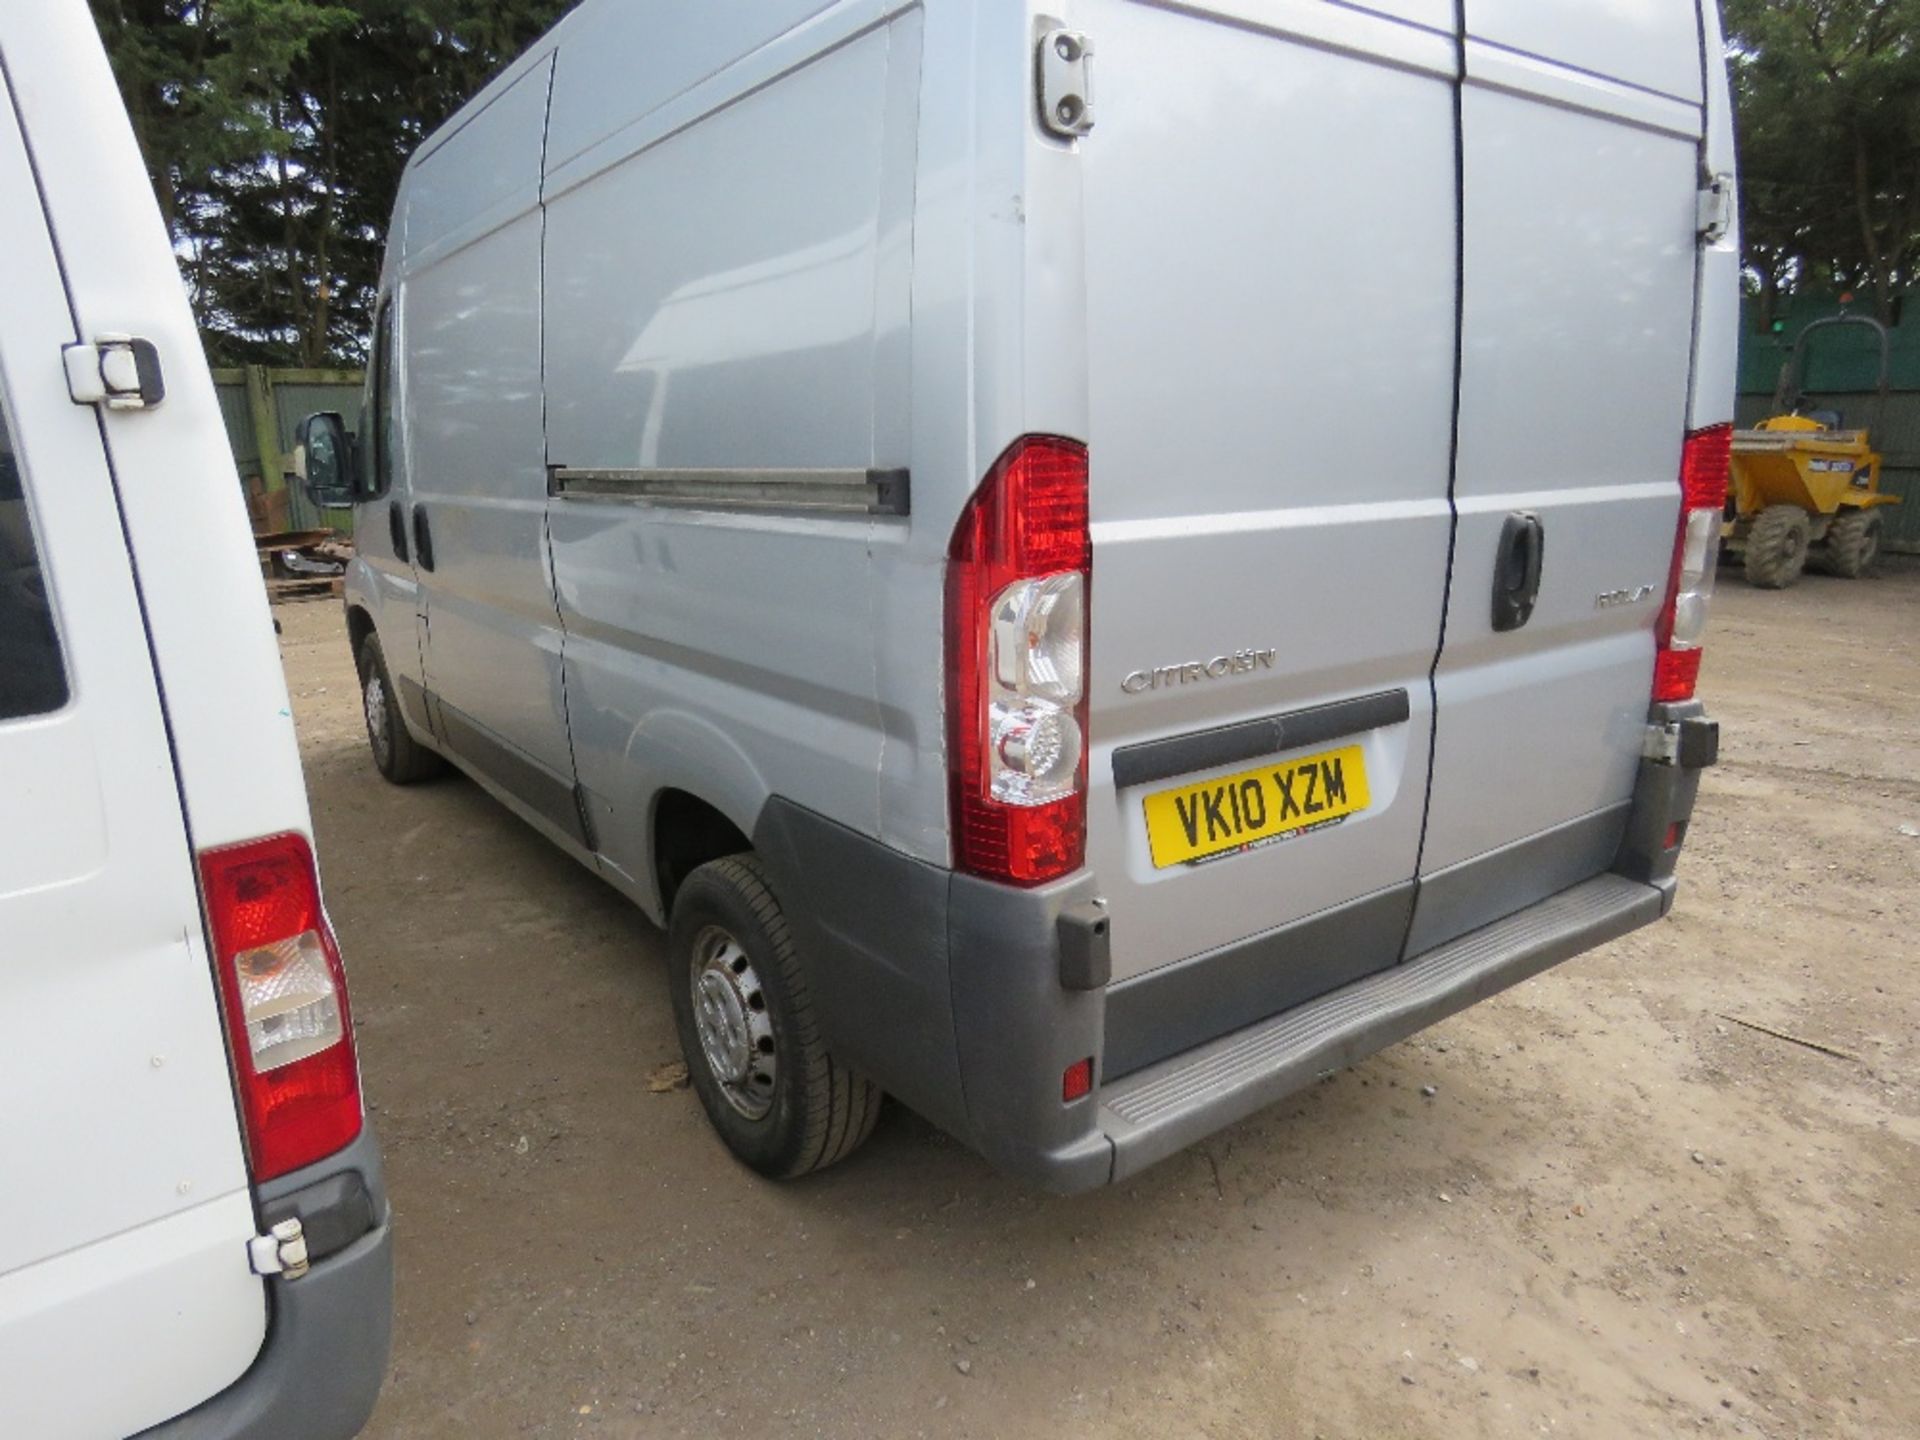 CITROEN RELAY SILVER PANEL VAN REG;VK10 XZM TESTED TILL 4/6/20 164,290 REC MILES. WHEN TESTED W - Image 10 of 10